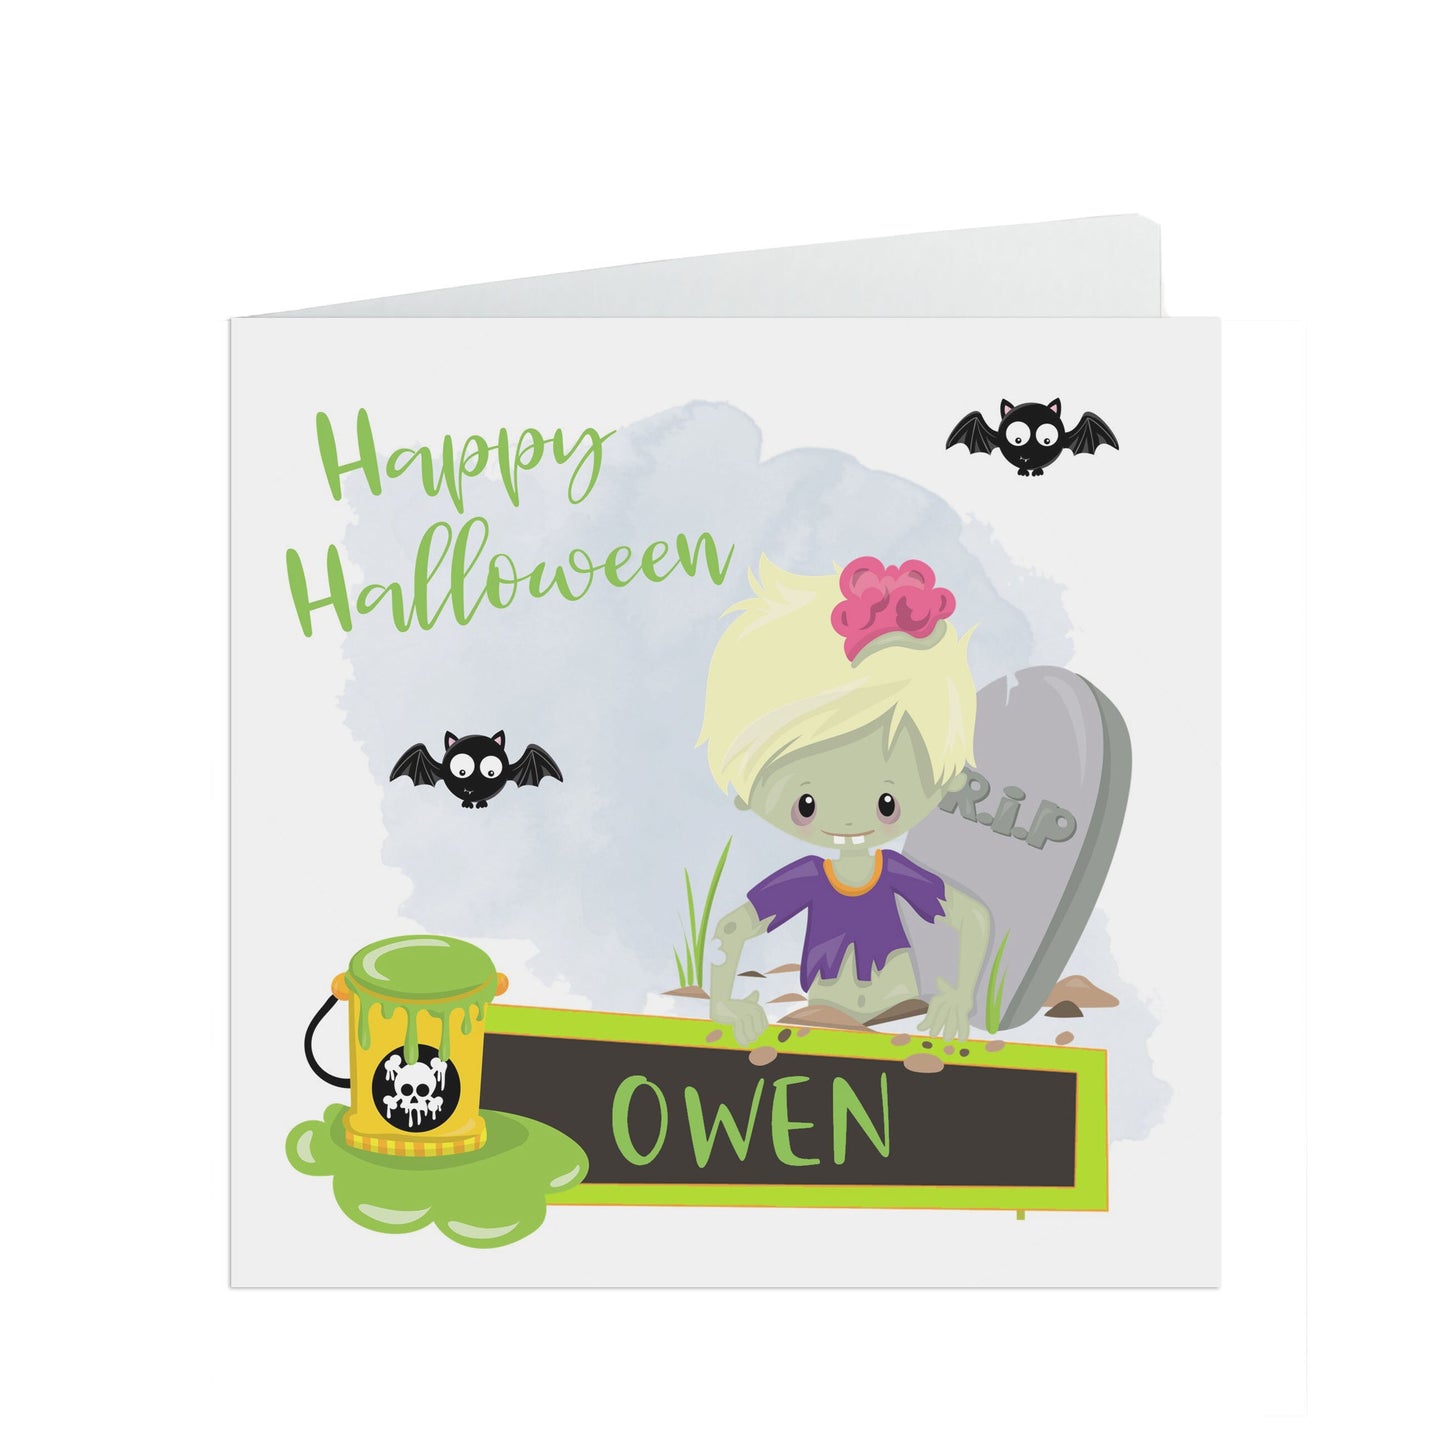 Zombie Halloween card, Personalised cute card for child with kraft brown envelope